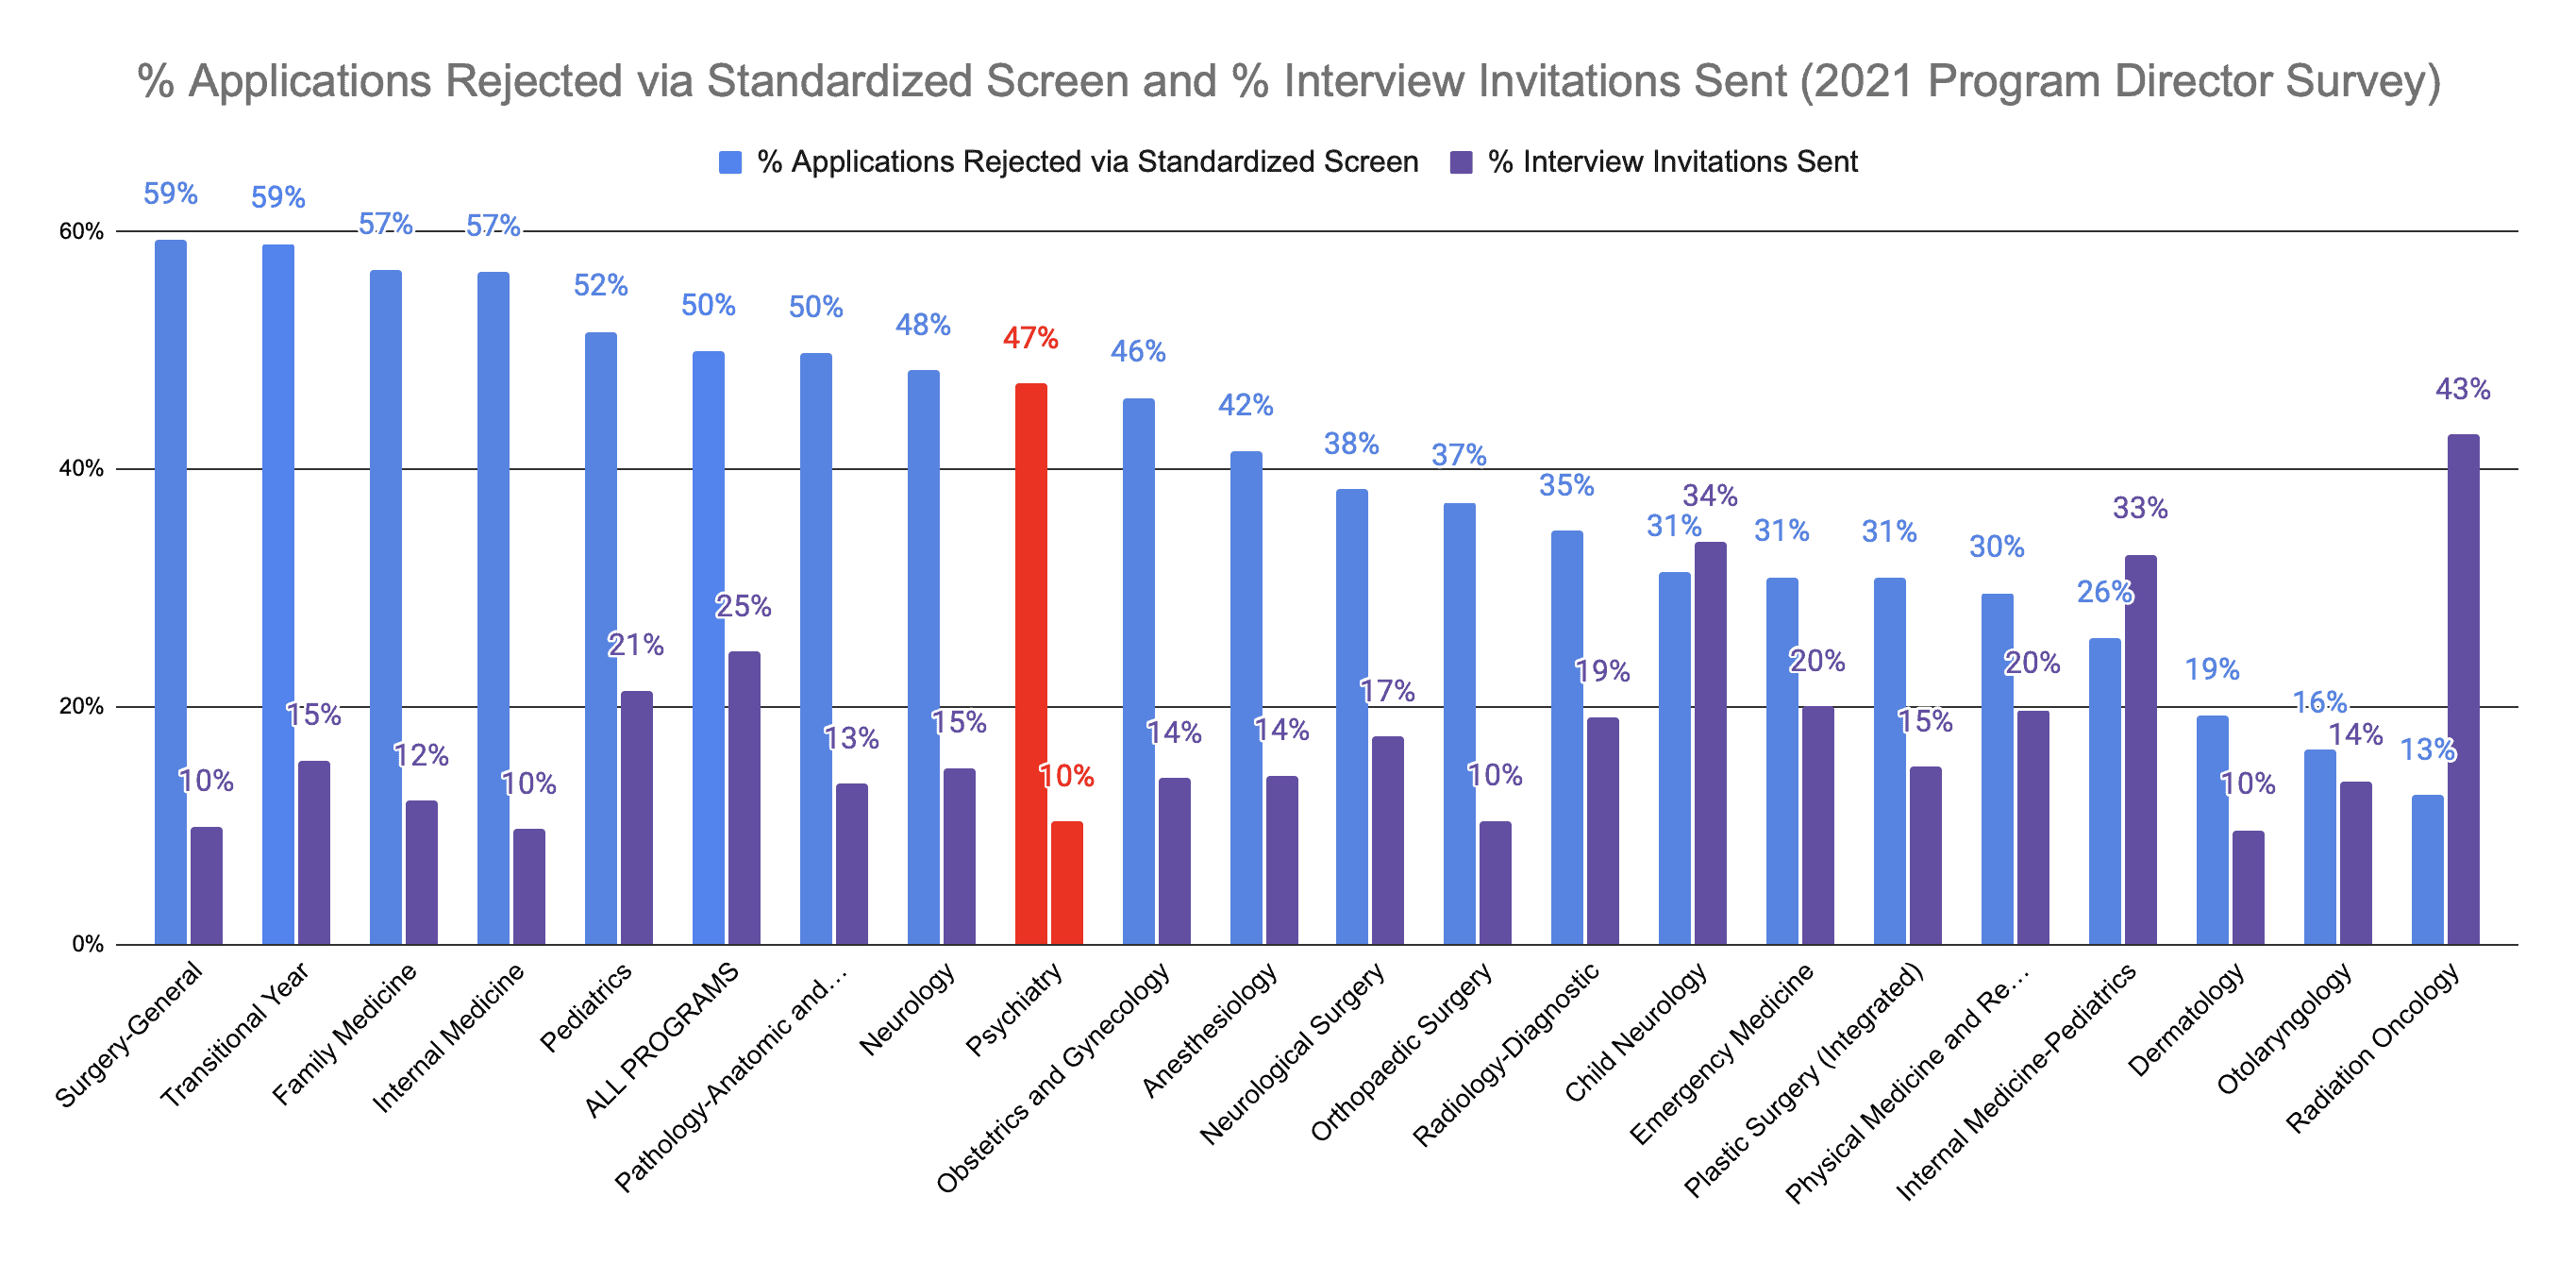 Psychiatry Applicants Screened Out and Interviewed 2021 PD Survey